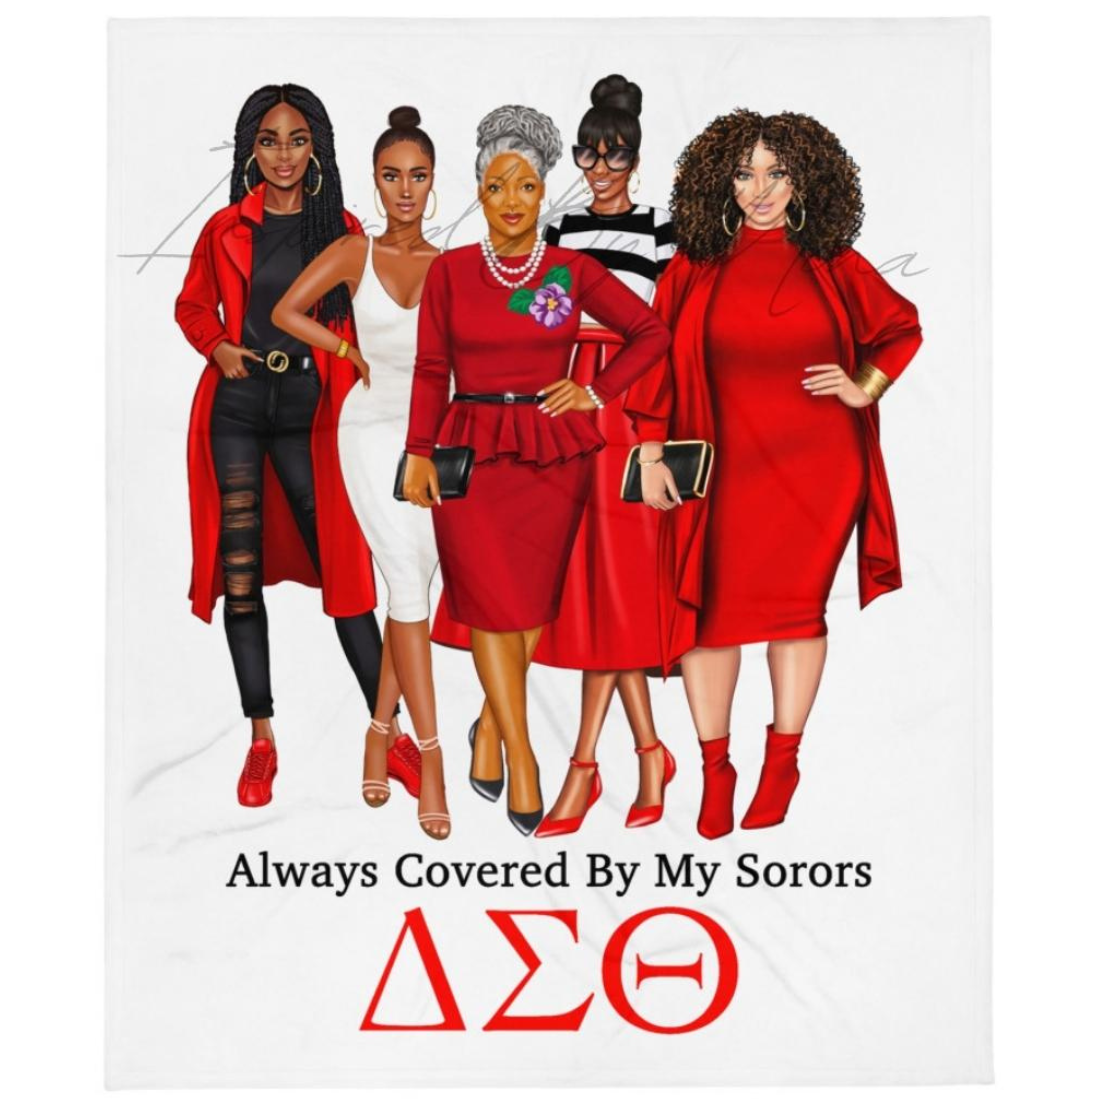 DST Blanket with Delta Dear